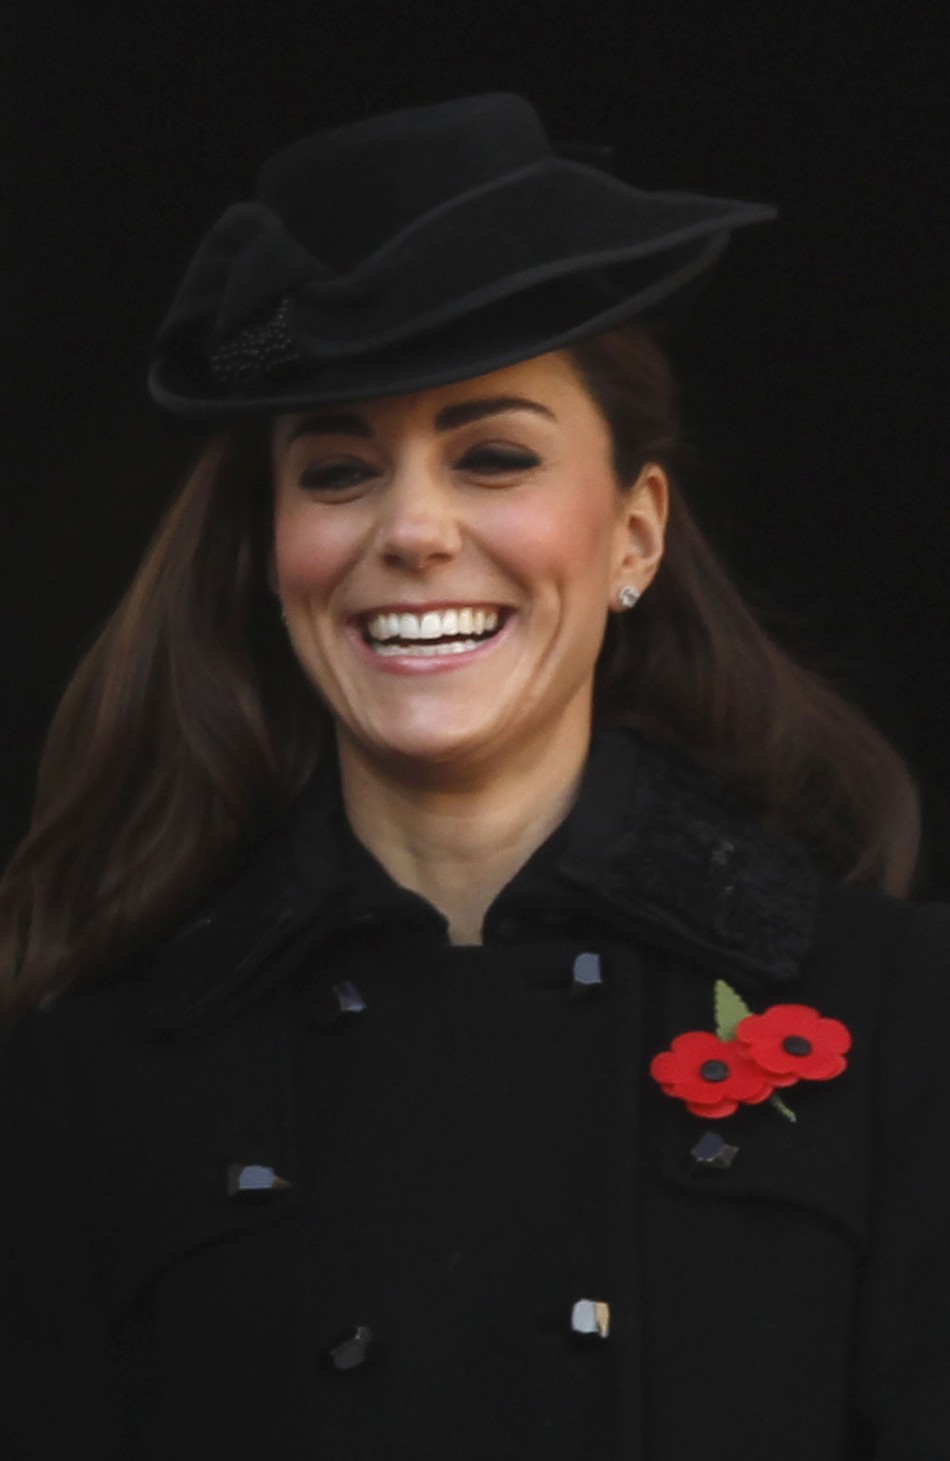 Catherine, Duchess of Cambridge attends the annual Remembrance Sunday ceremony at the Cenotaph in London